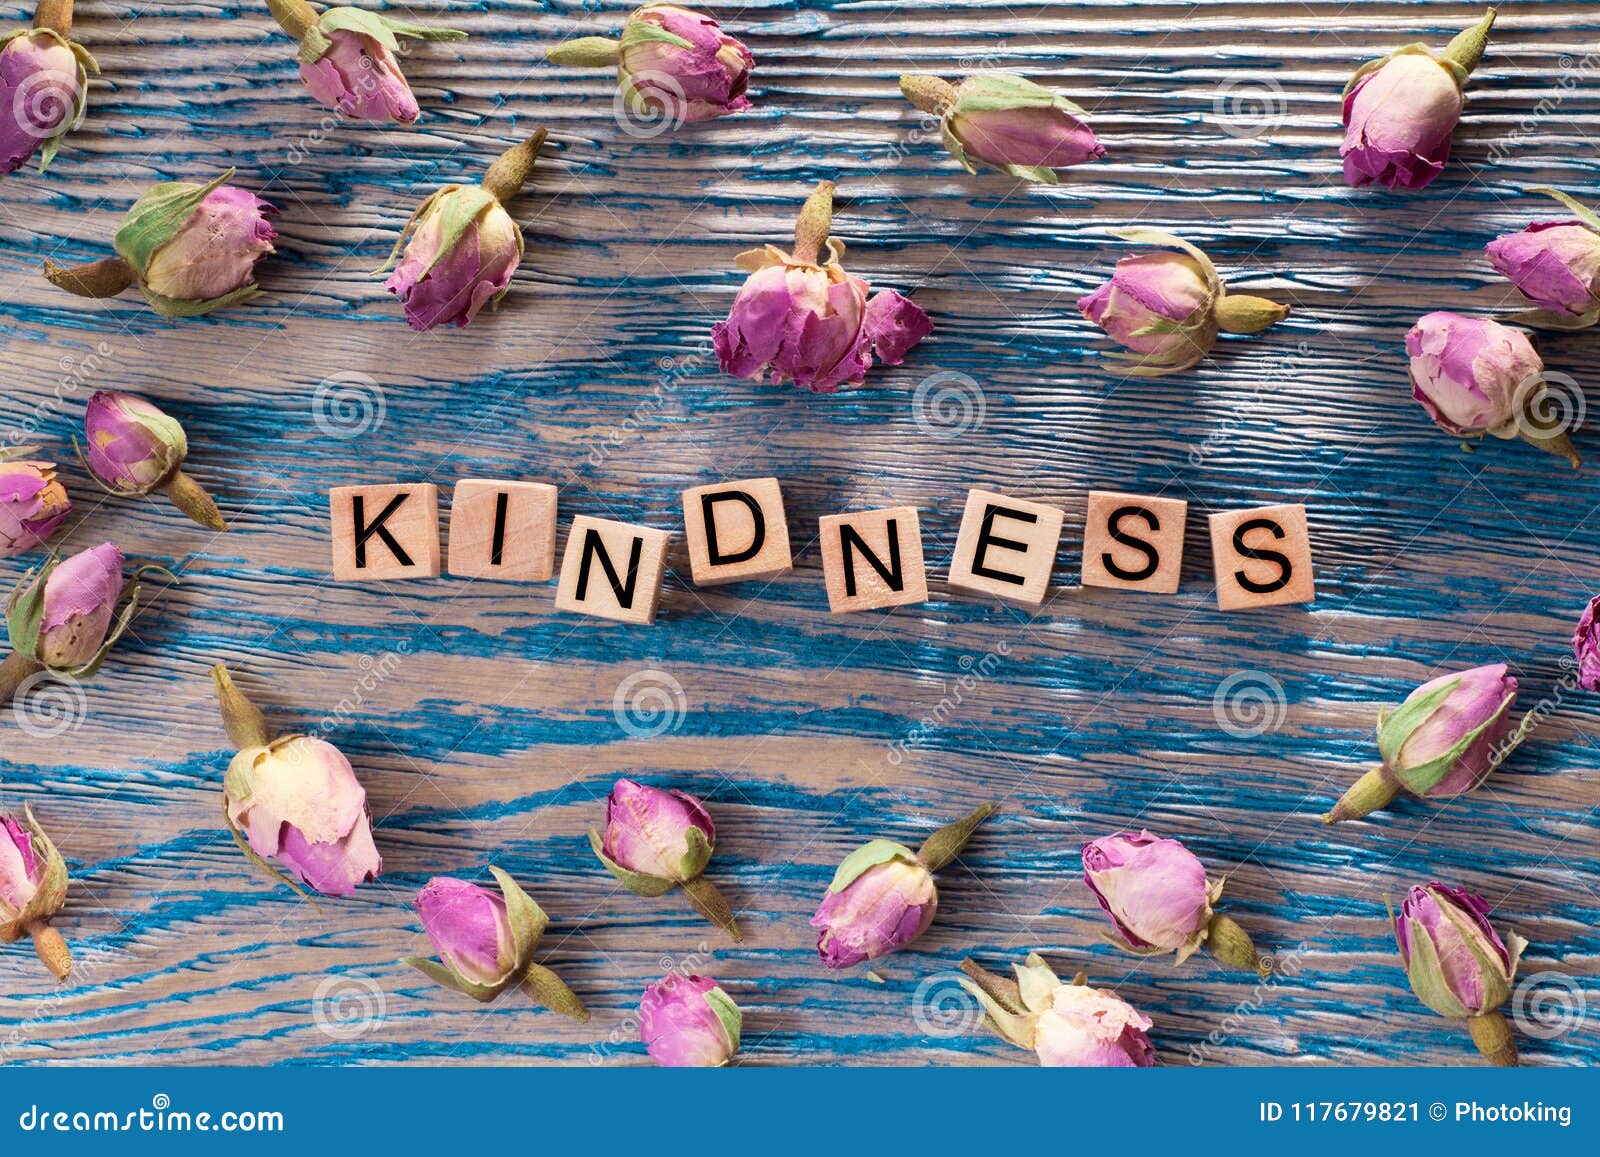 kindness on wooden cube